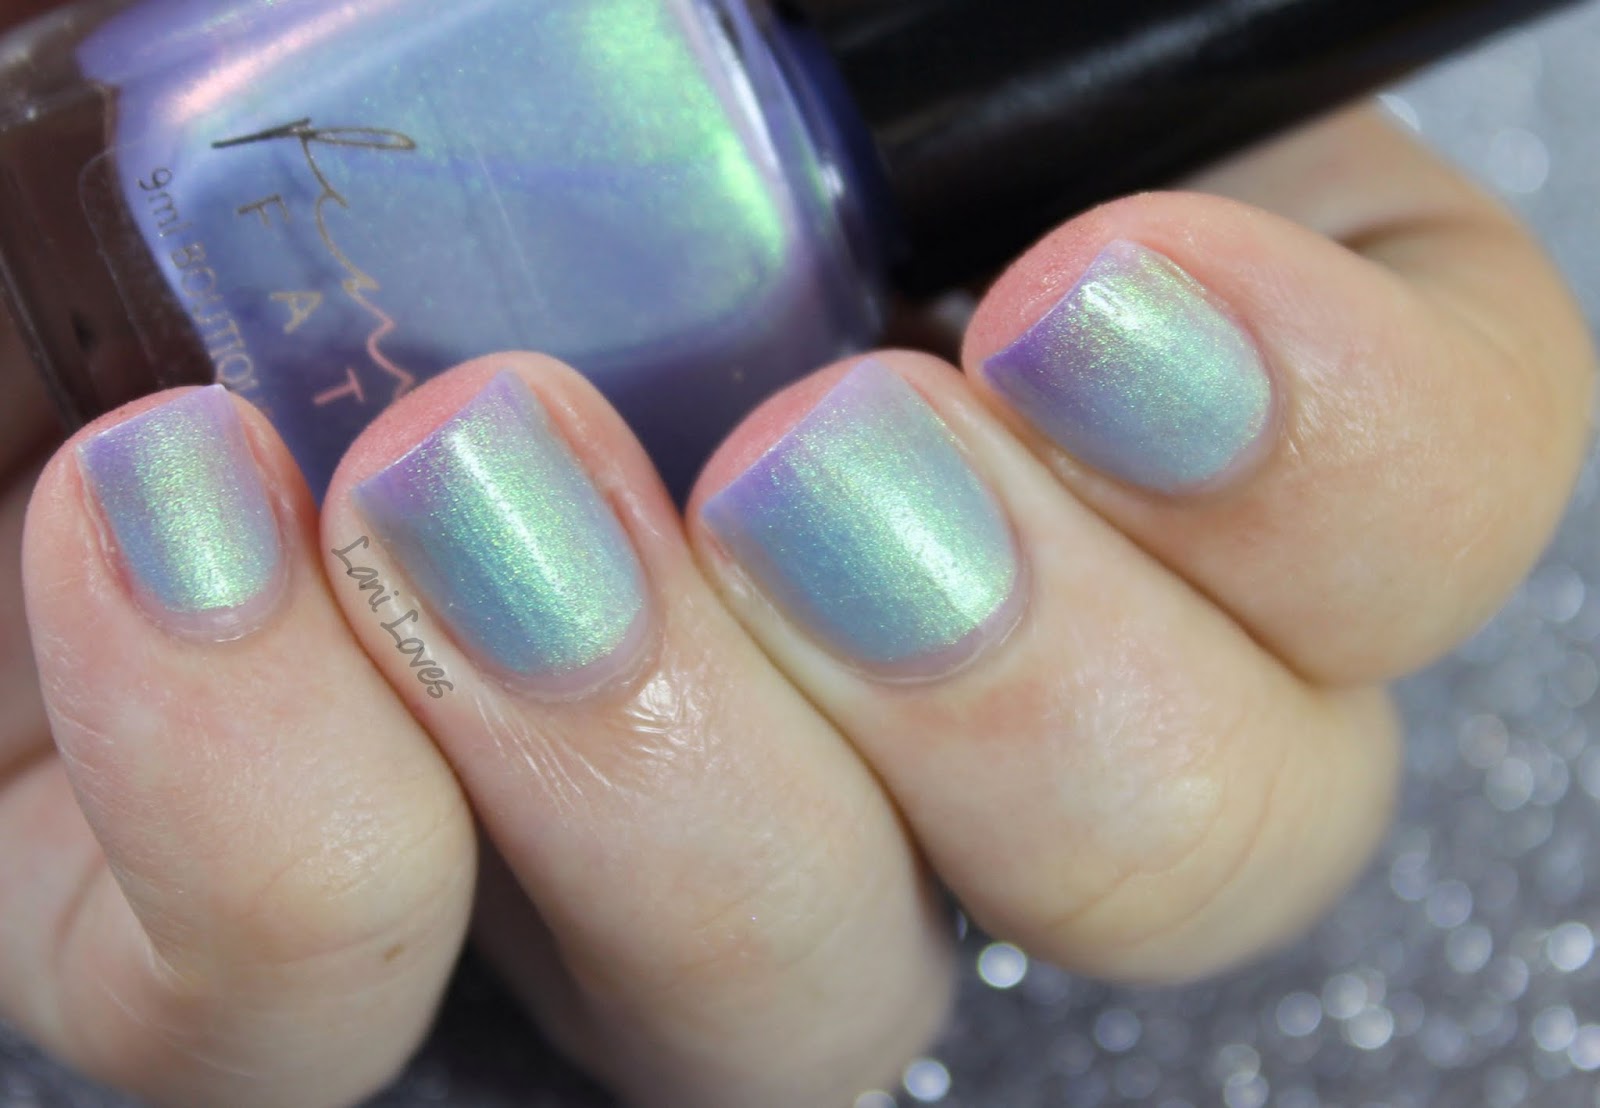 Femme Fatale Cosmetics - Glass Coffin nail polish swatches & review